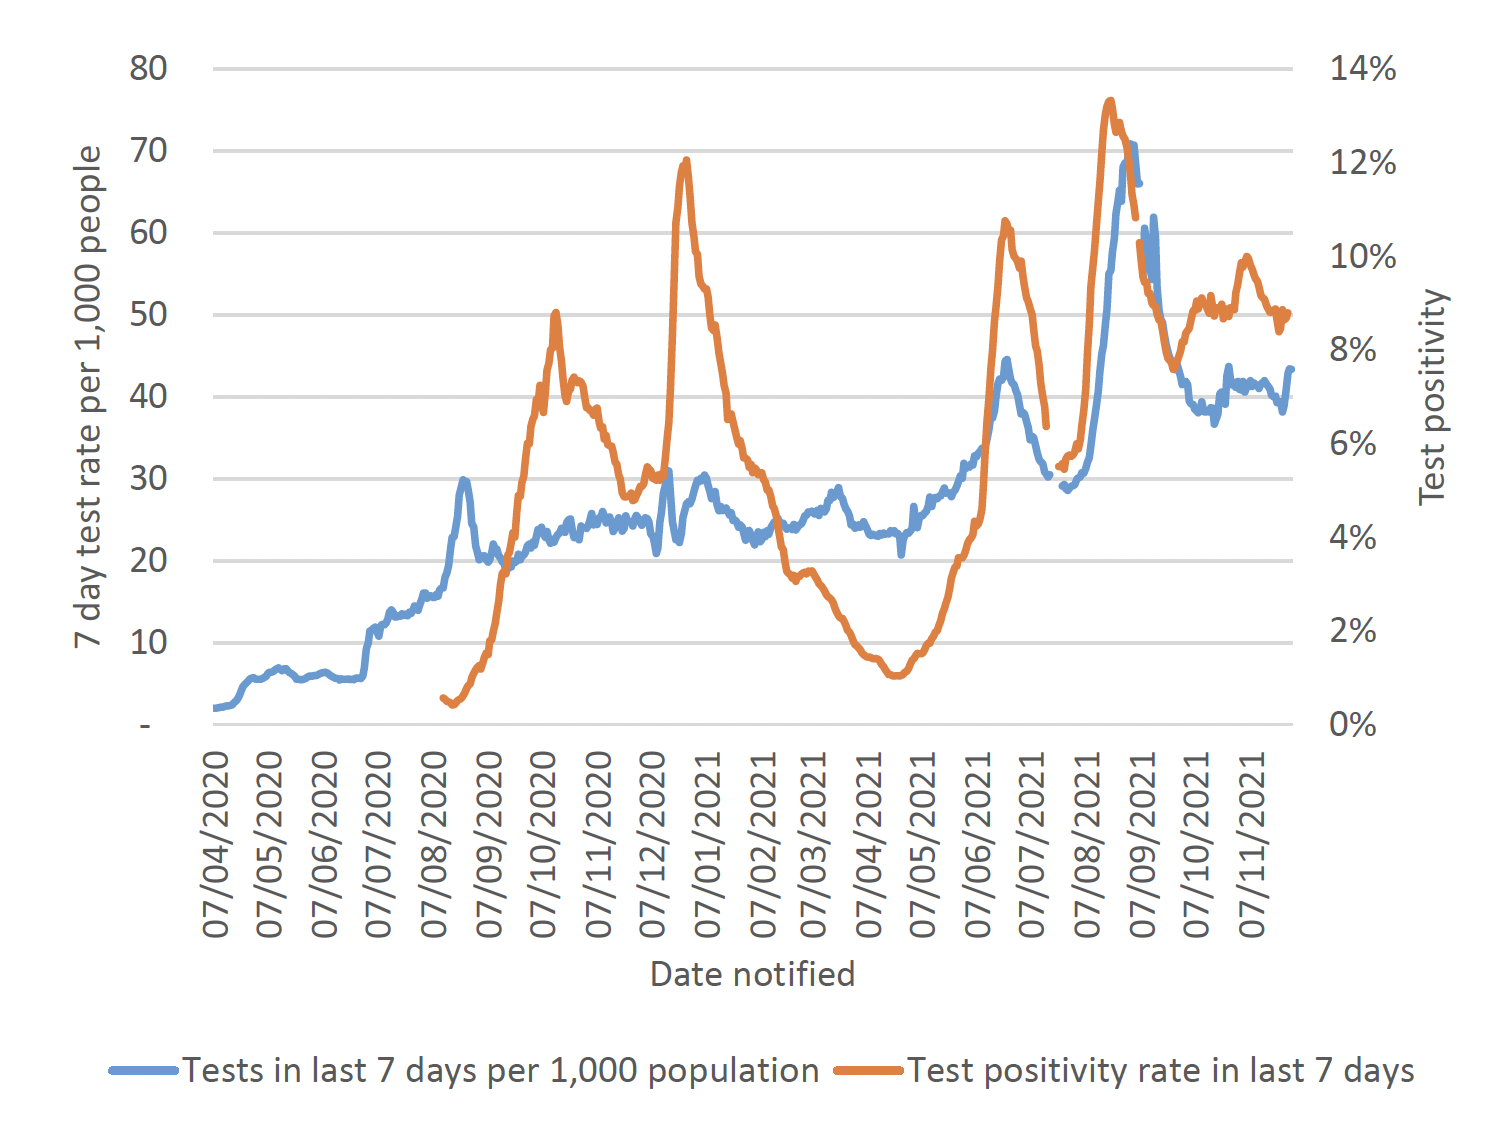 This line chart shows two trend lines; tests per 1,000 population in the last seven days and test positivity rate from April 2020 to 9 December 2021. 
Overall, tests per 1,000 population in the last seven days have been increasing throughout the pandemic, reaching a peak at the end of August 2021, then decreasing by mid-October. Tests per 1,000 population in the last seven days remained relatively stable since then. Test positivity rate in the last seven days (proportion of positive tests) peaked in October 2020, December 2020, June 2021 and in August 2021. Test positivity rate then decreased and has been fluctuating since end of September 2021. 
